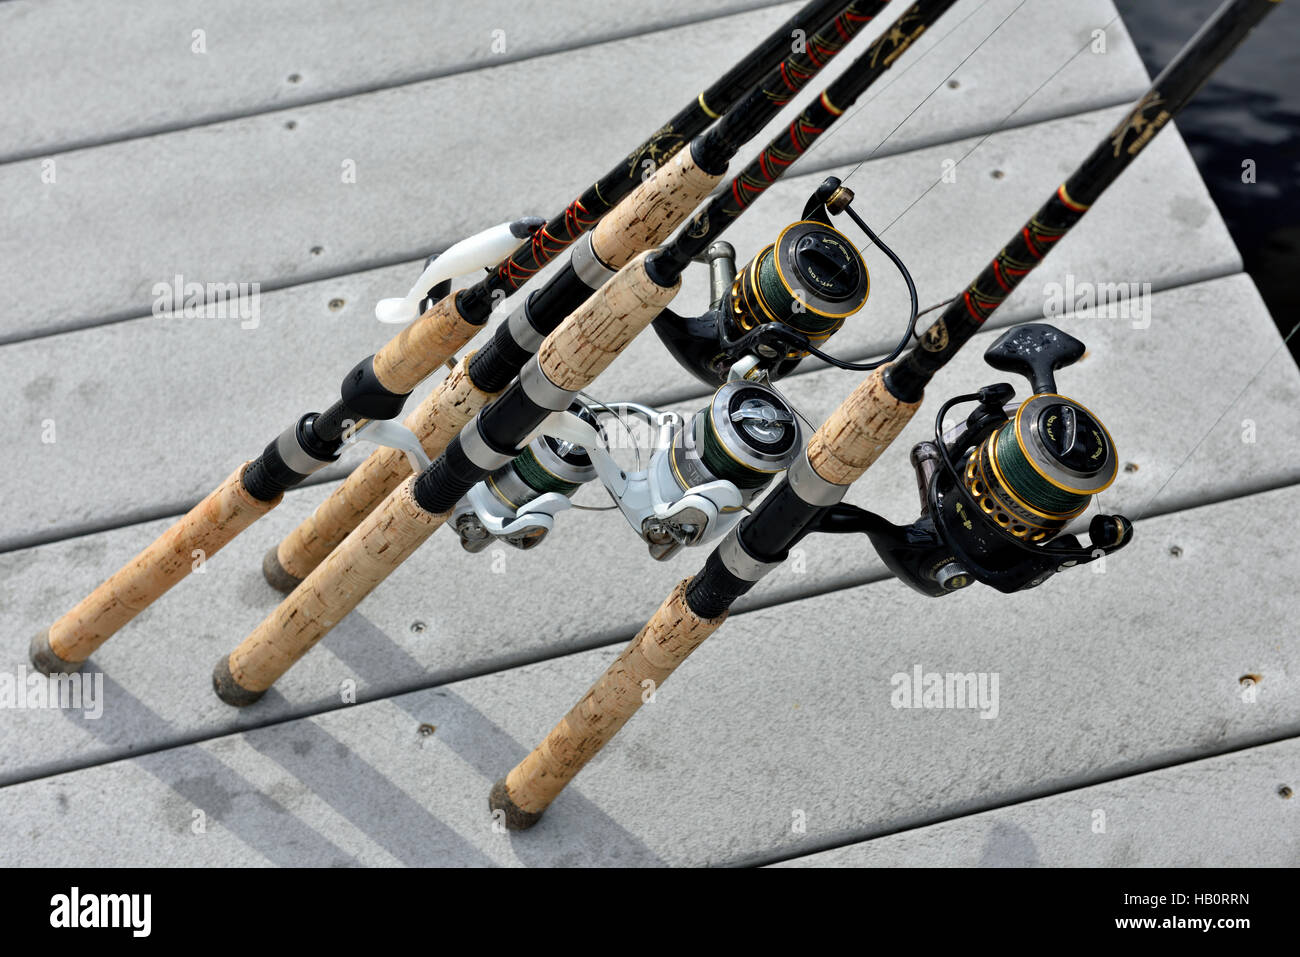 Fishing rods and reels Stock Photo